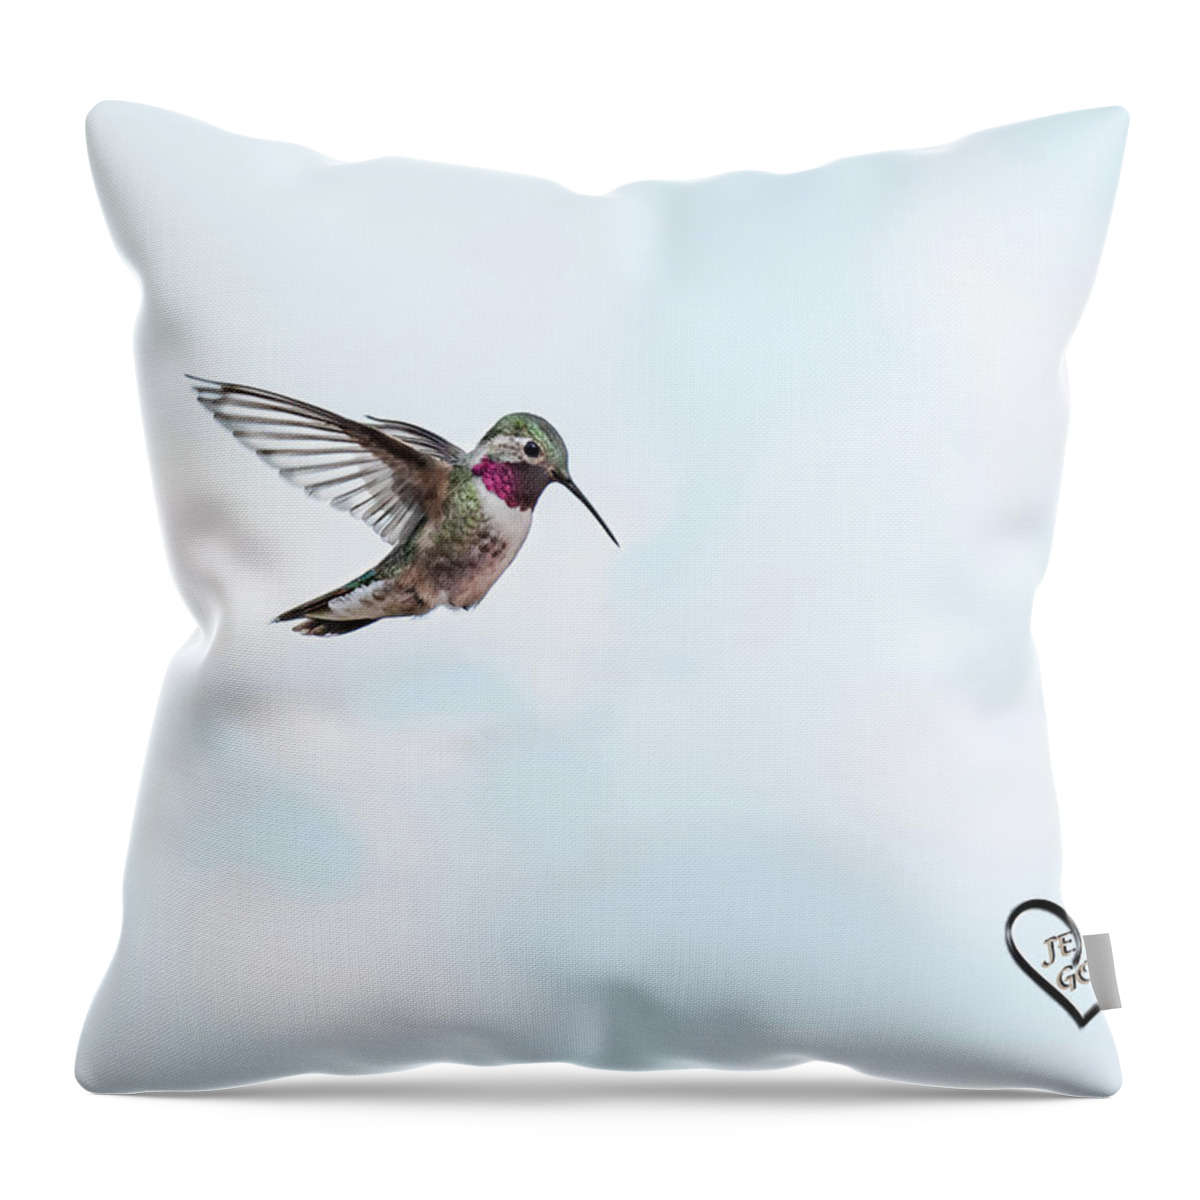 Hummer Throw Pillow featuring the photograph Humming Hummingbird by Jennifer Grossnickle